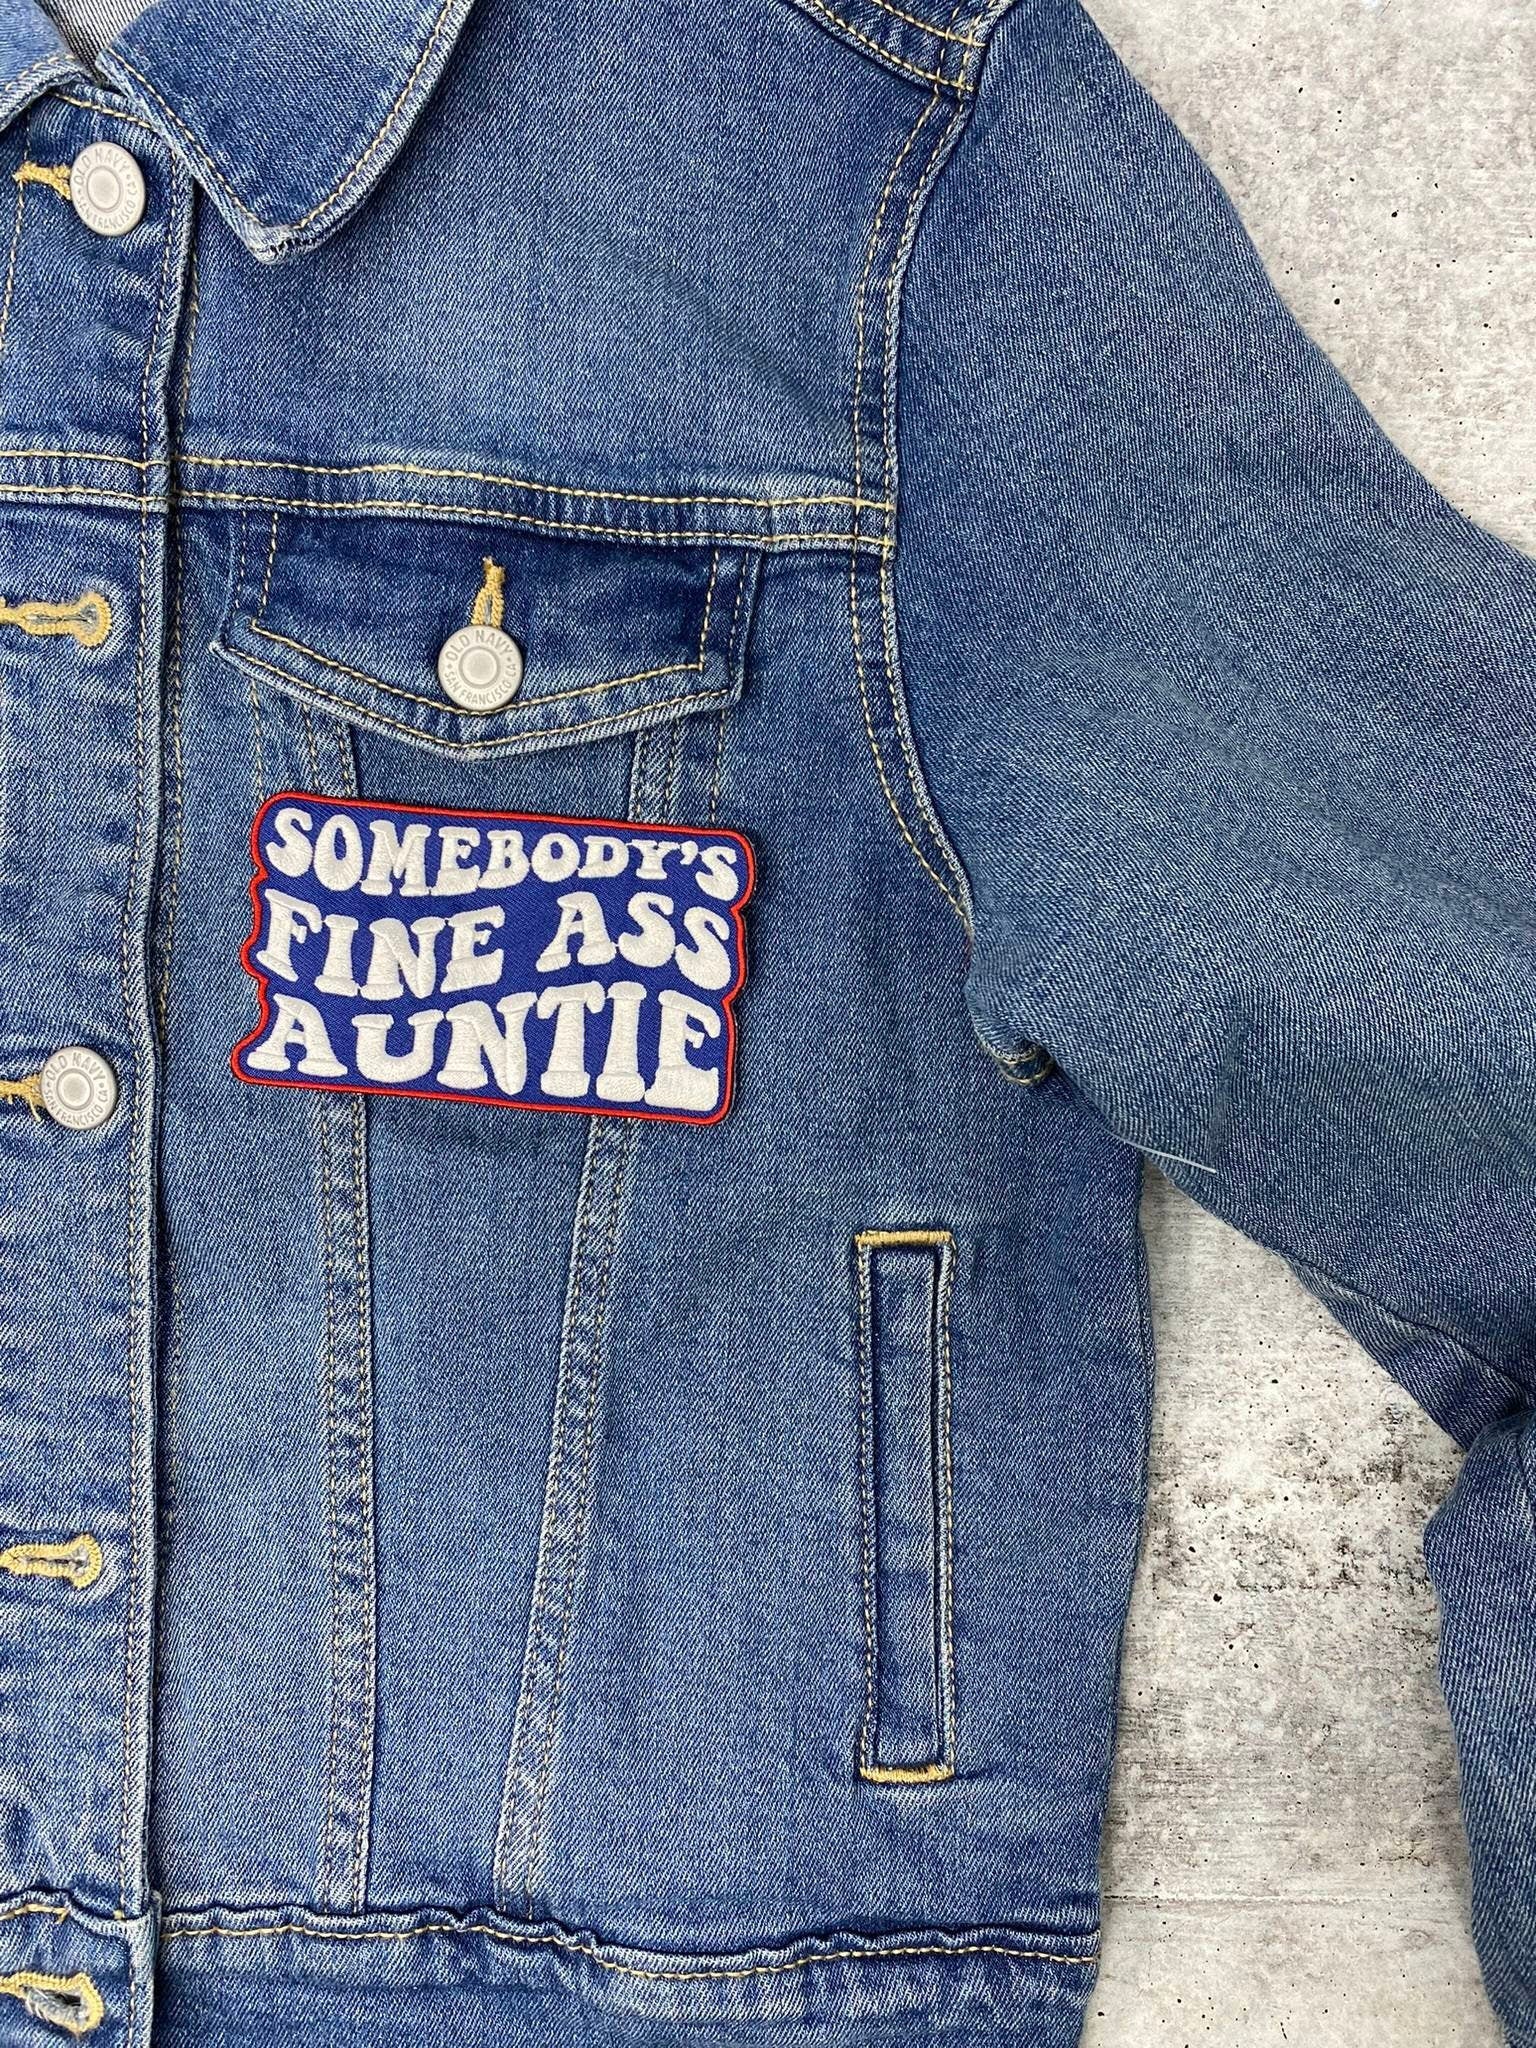 New, "Somebody's Fine Ass AUNTIE" 1-pc, Iron-on Embroidered Patch, Cute Patch for Jackets, Hats, Crocs, Gifts for Aunt, Funny Gifts